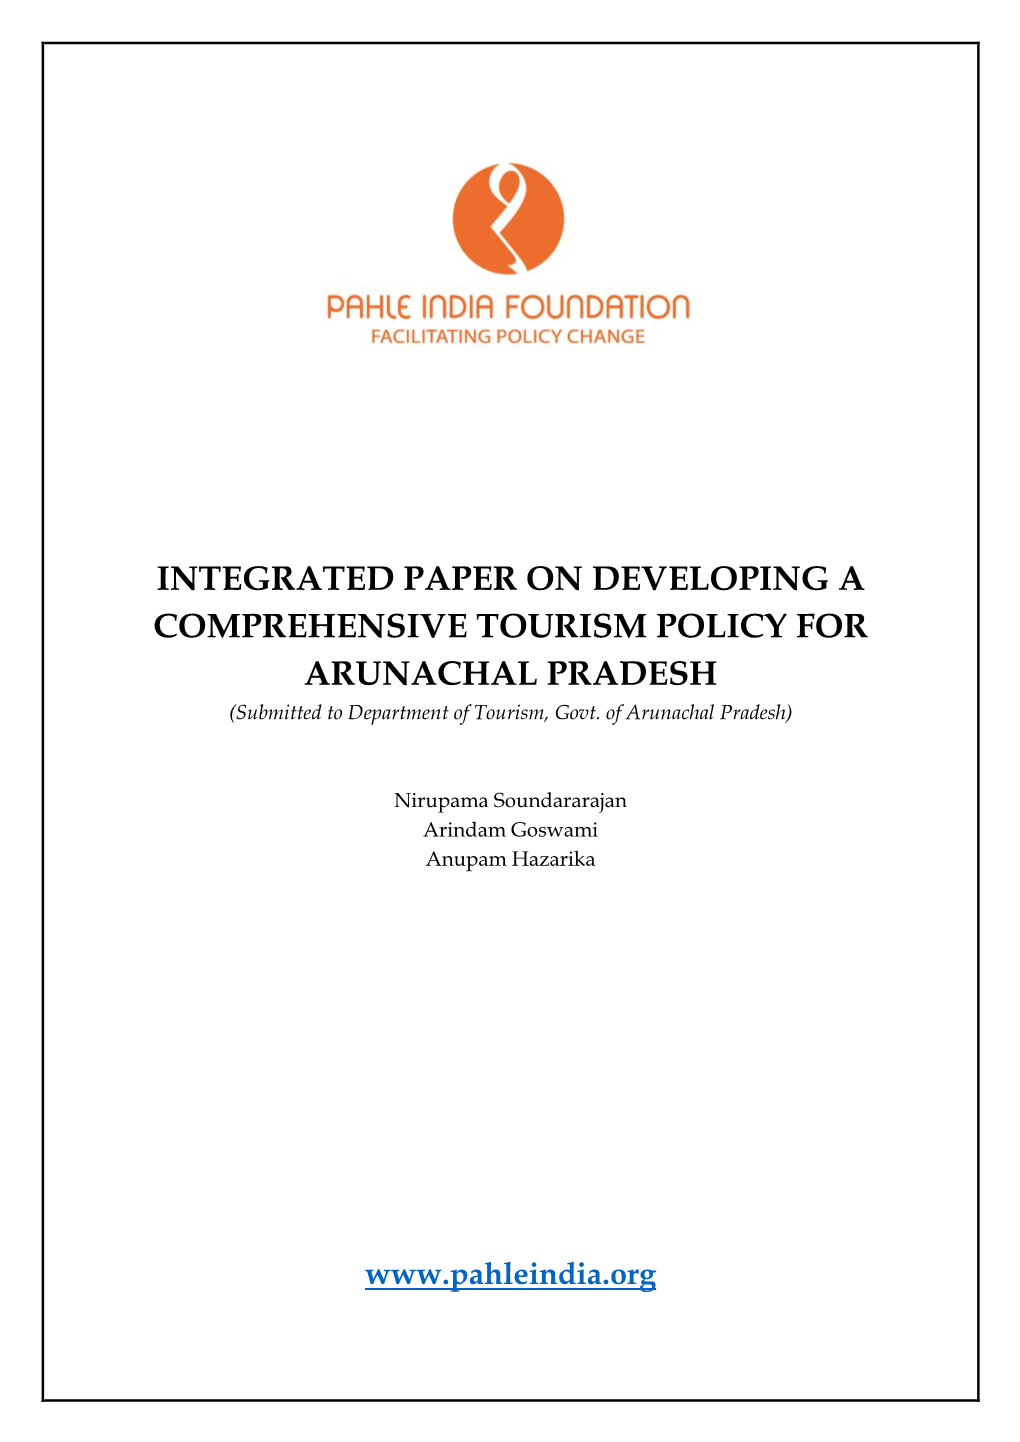 INTEGRATED PAPER on DEVELOPING a COMPREHENSIVE TOURISM POLICY for ARUNACHAL PRADESH (Submitted to Department of Tourism, Govt